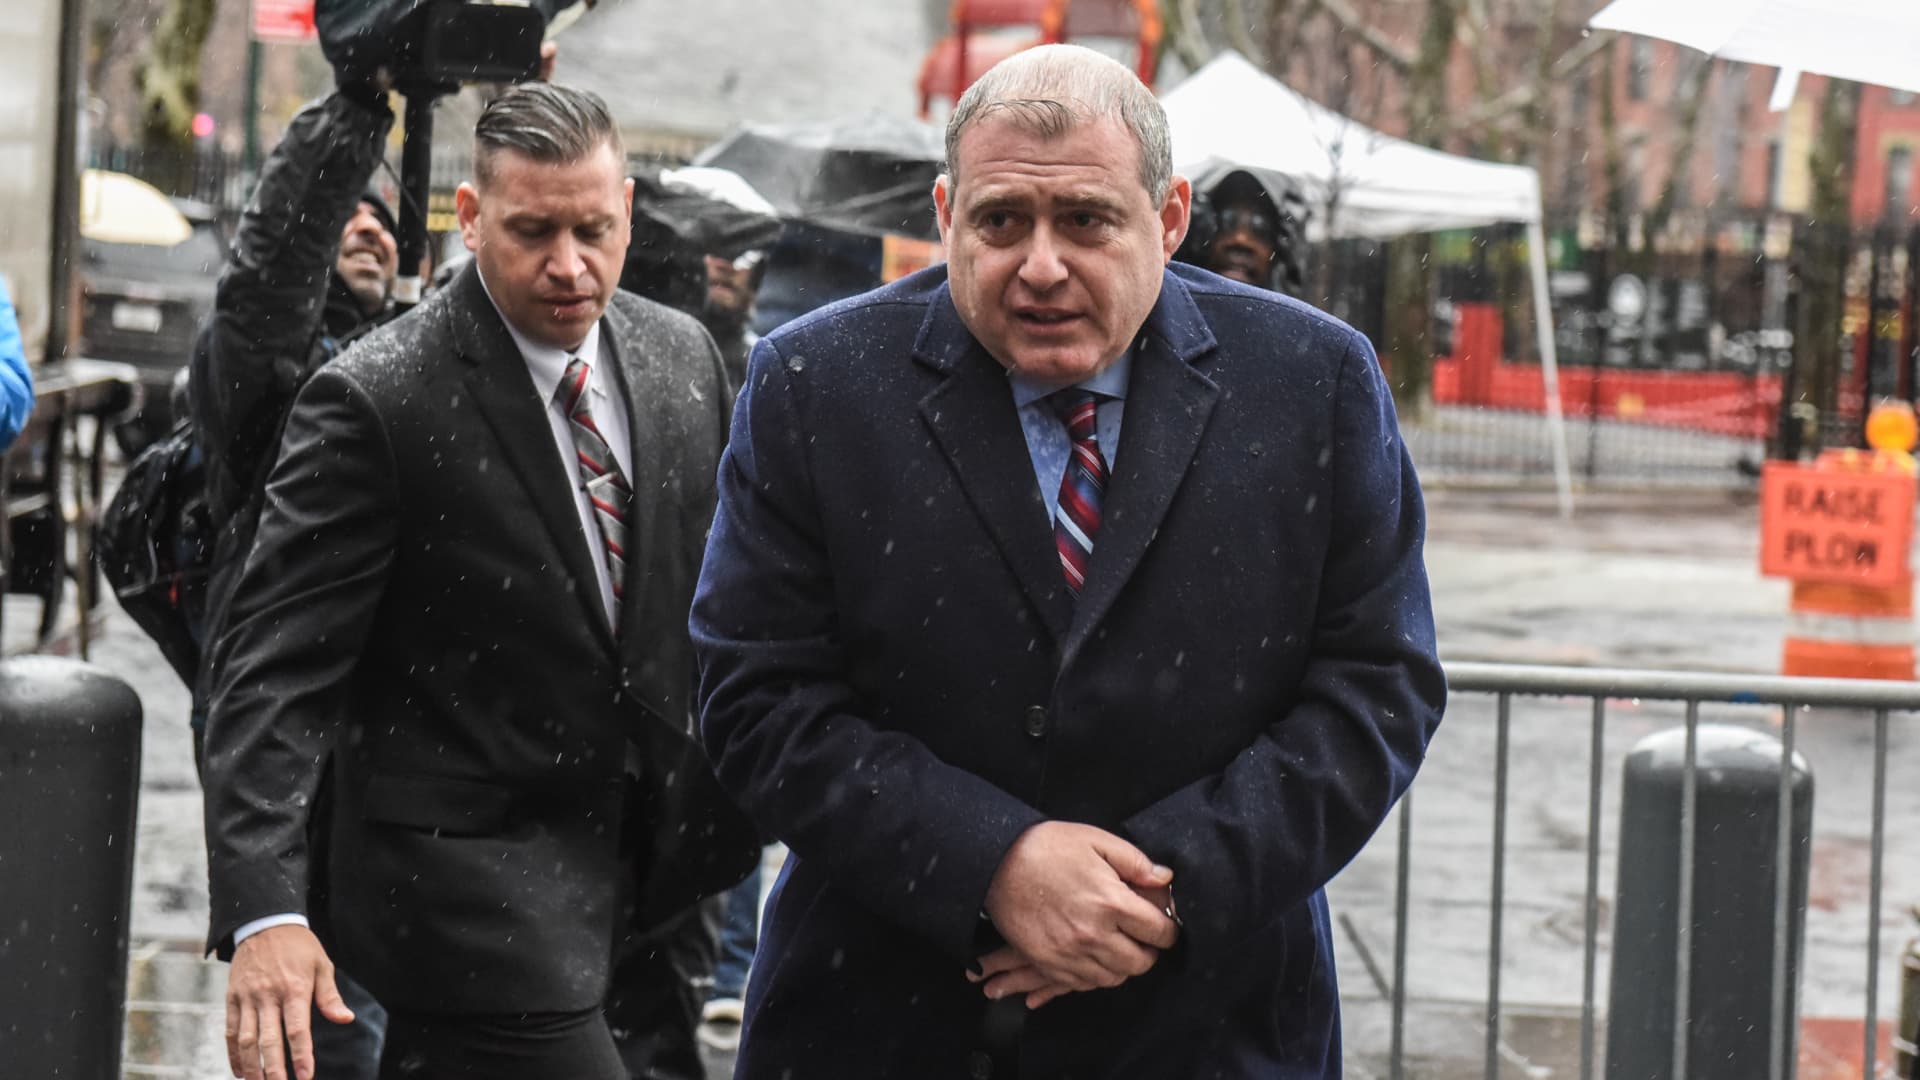 Lev Parnas arrives at Federal Court on December 17, 2019 in New York City.